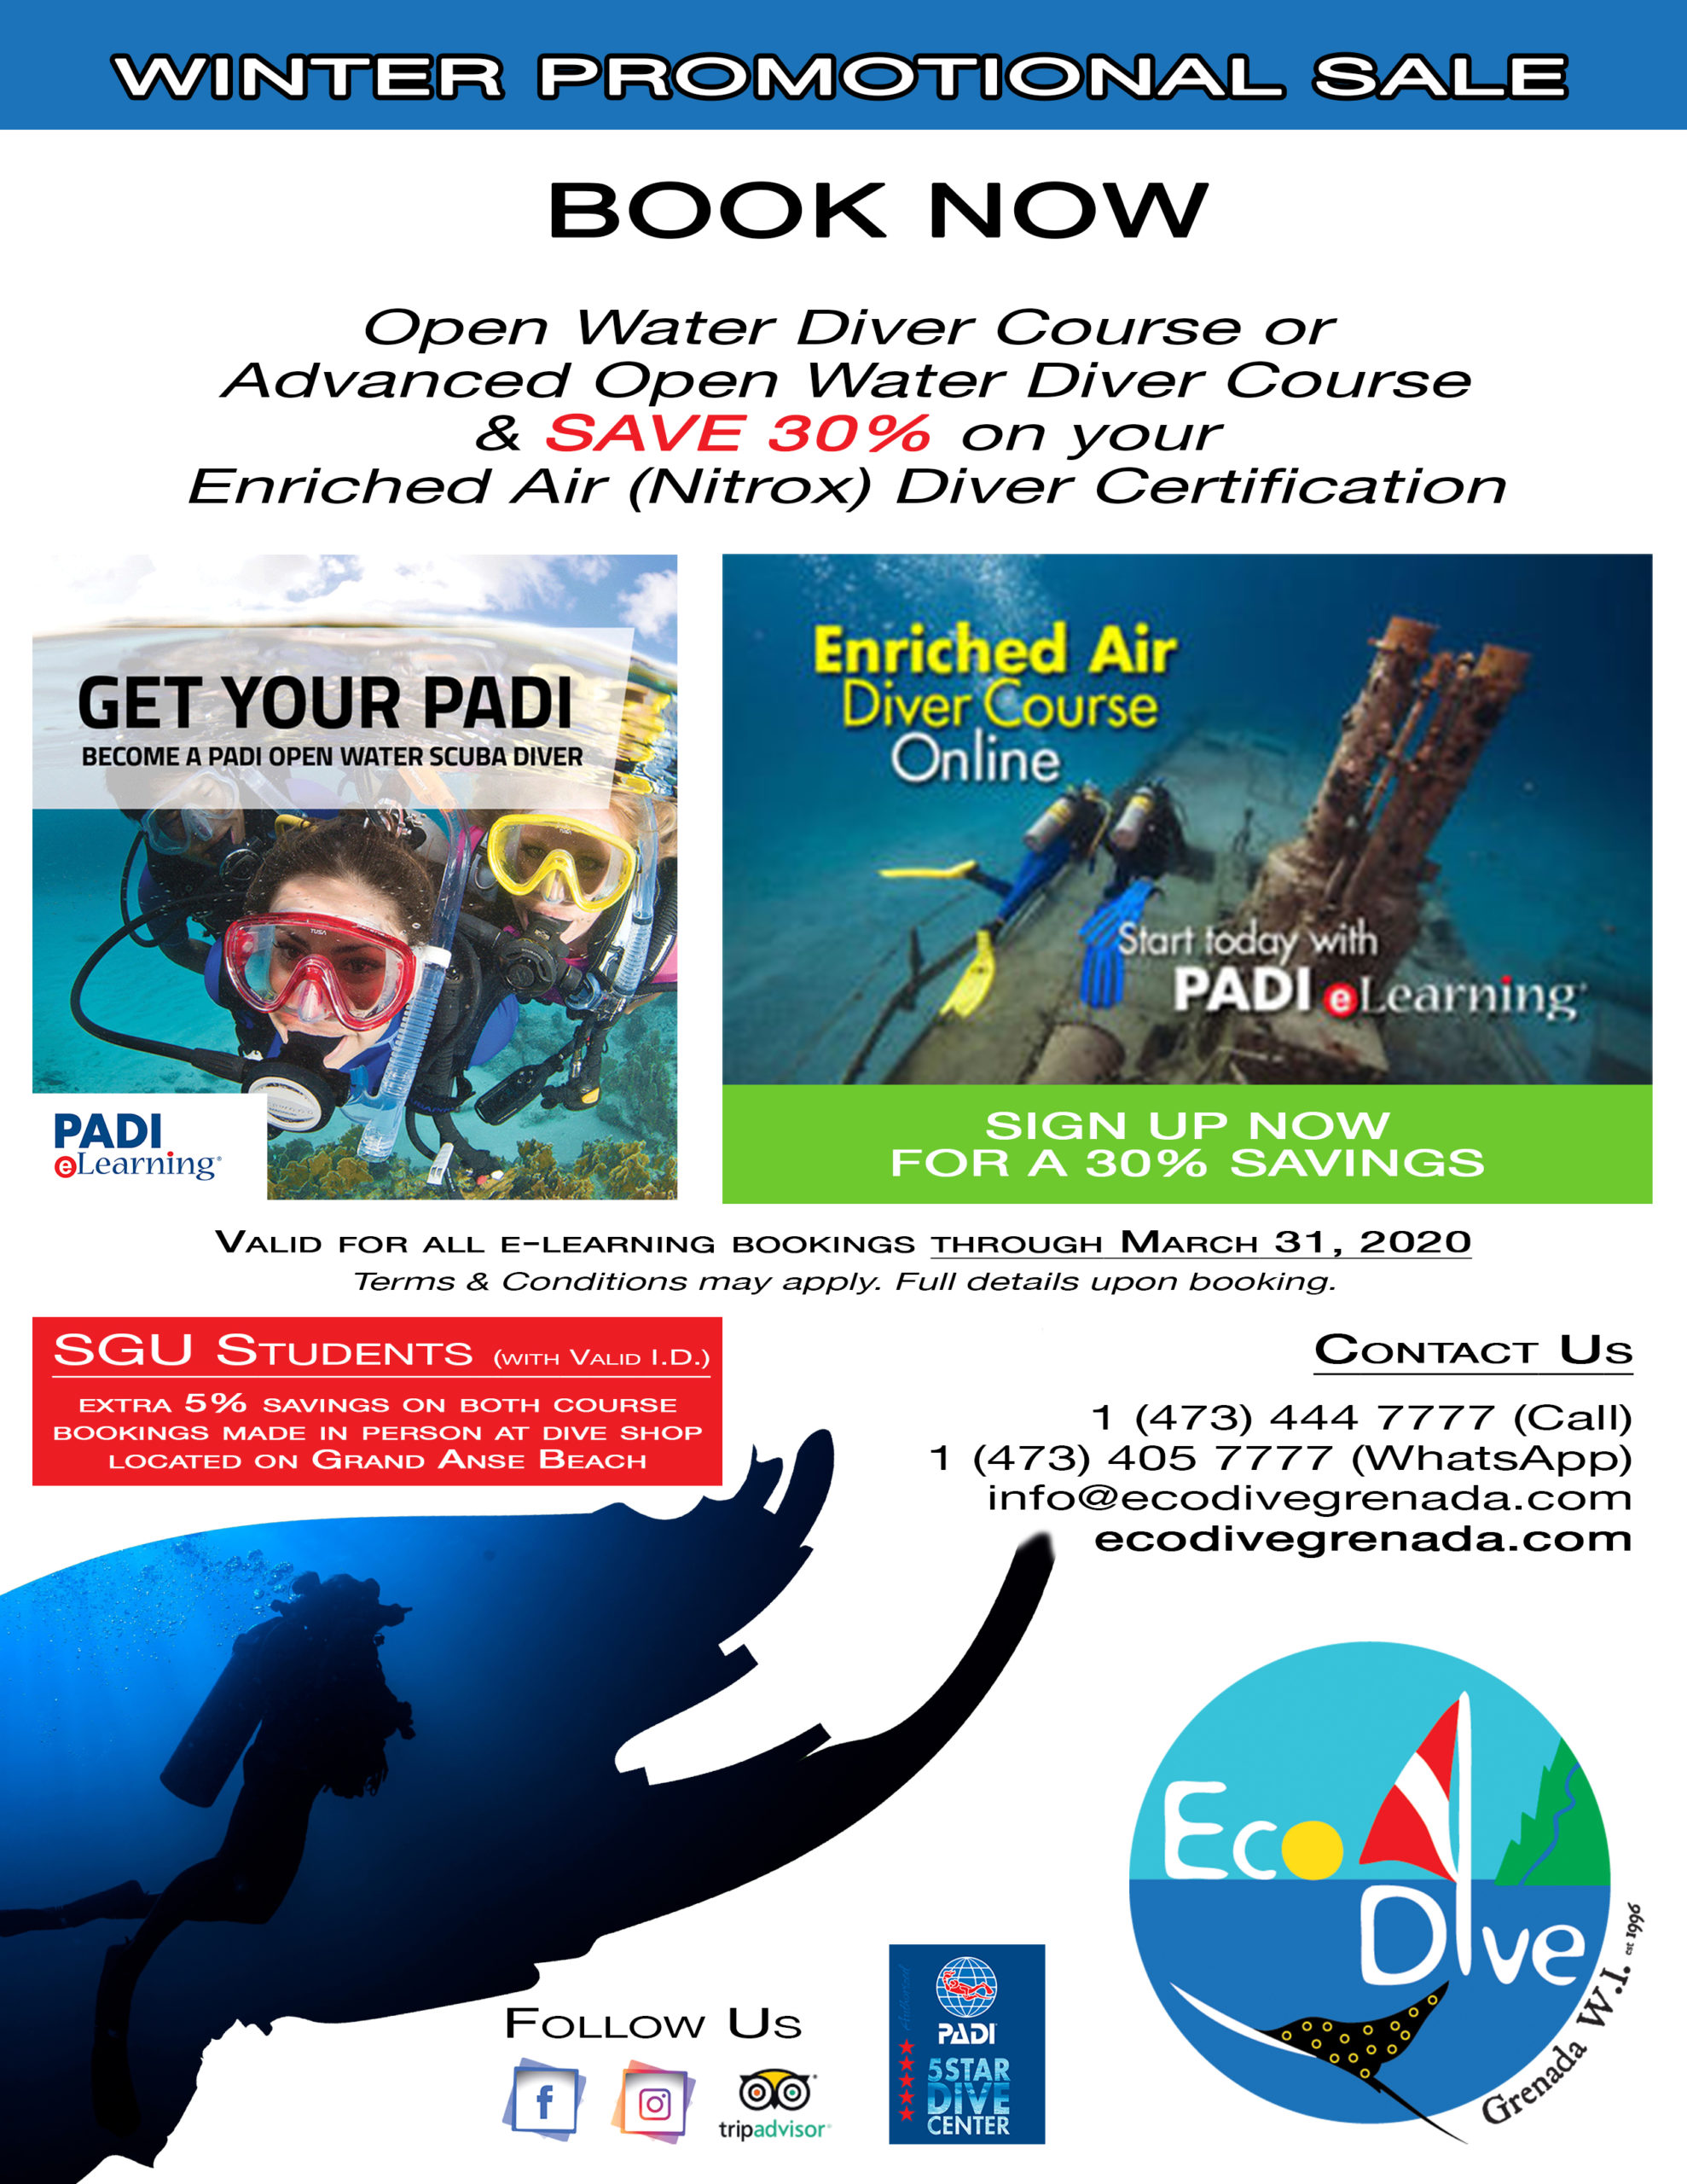 A flyer for the winter promotional sale at eco scuba dive Grenada.